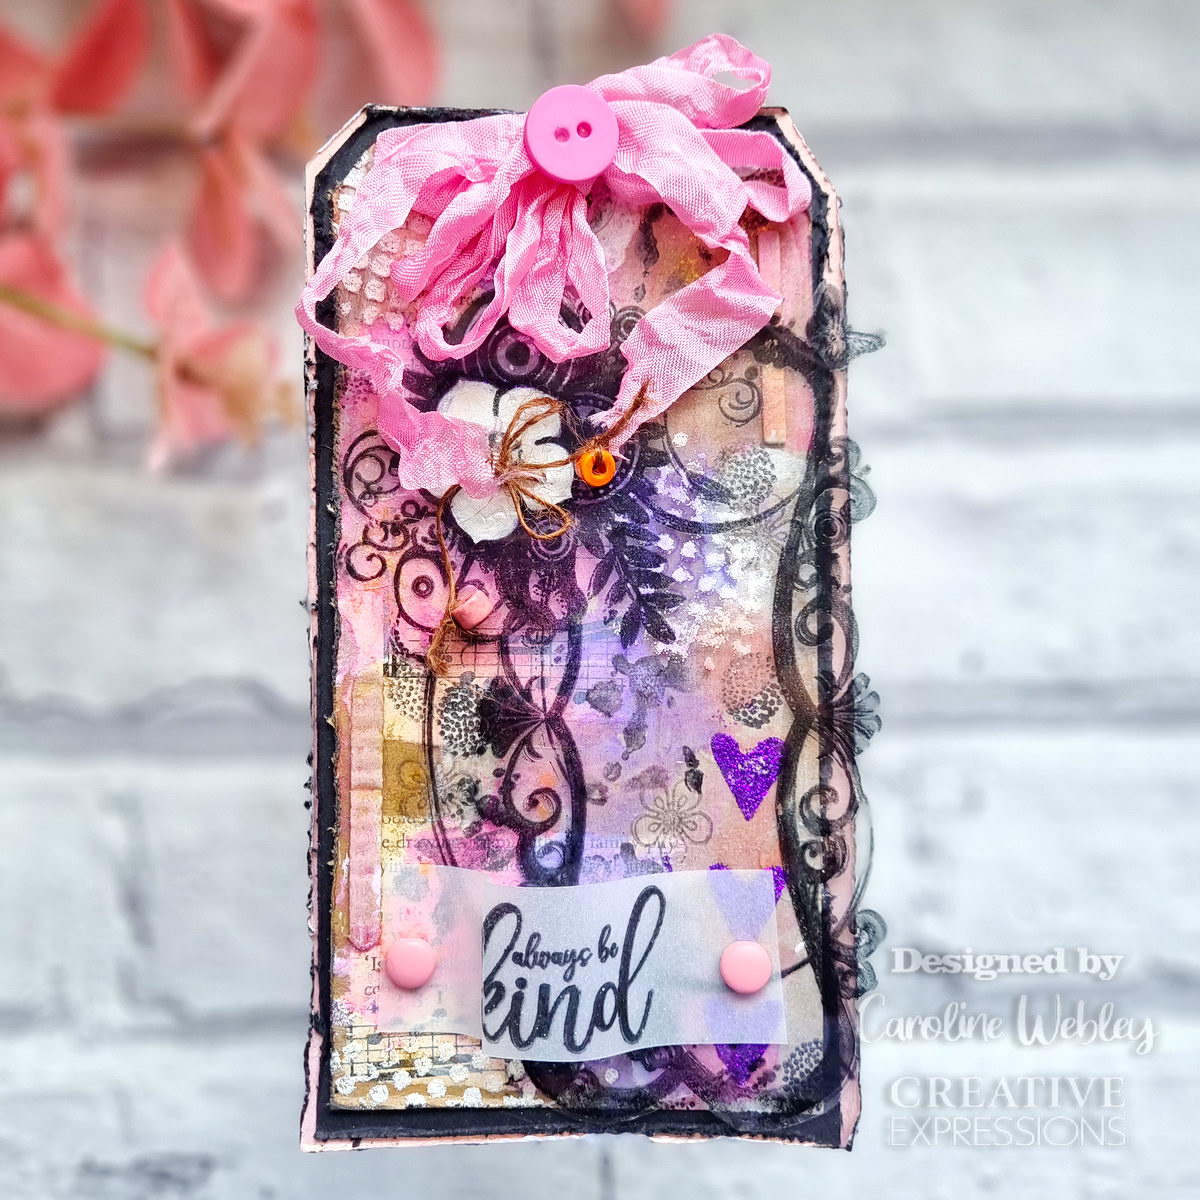 Creative Expressions Mini Stencil You Have My Heart 4 in x 3 in